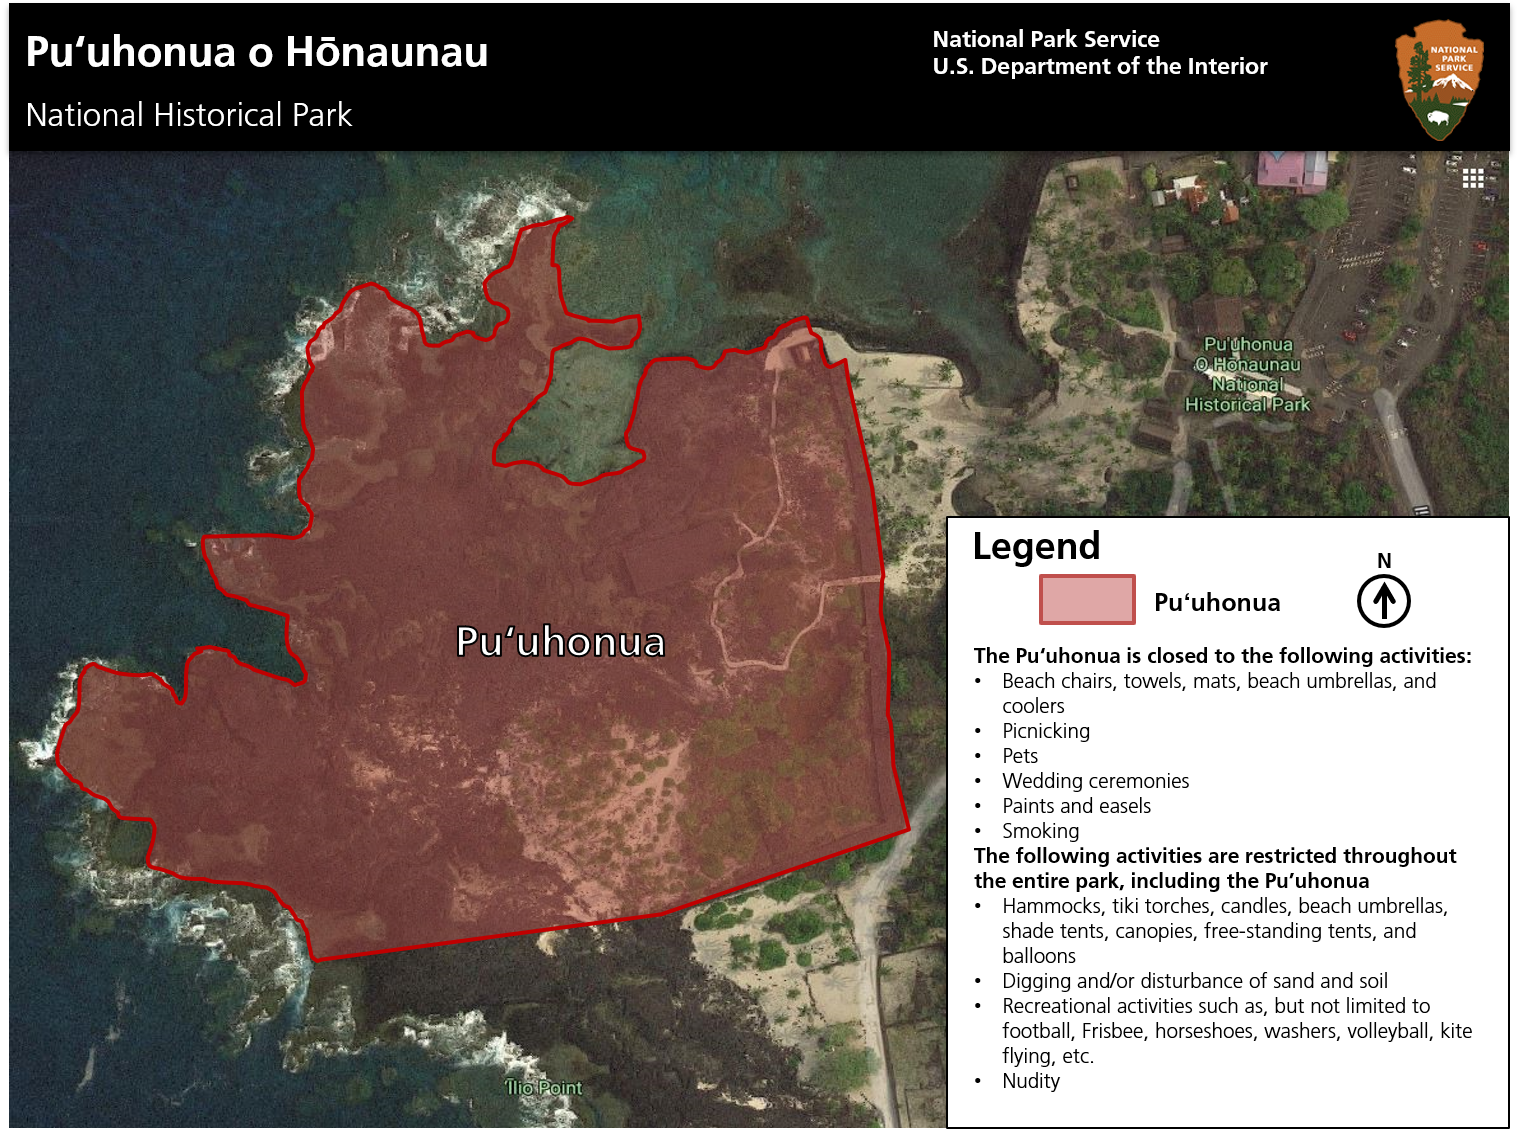 Map of the Puʻuhonua area with Restrictions listed. Full alt text is available in the drop down box below image.